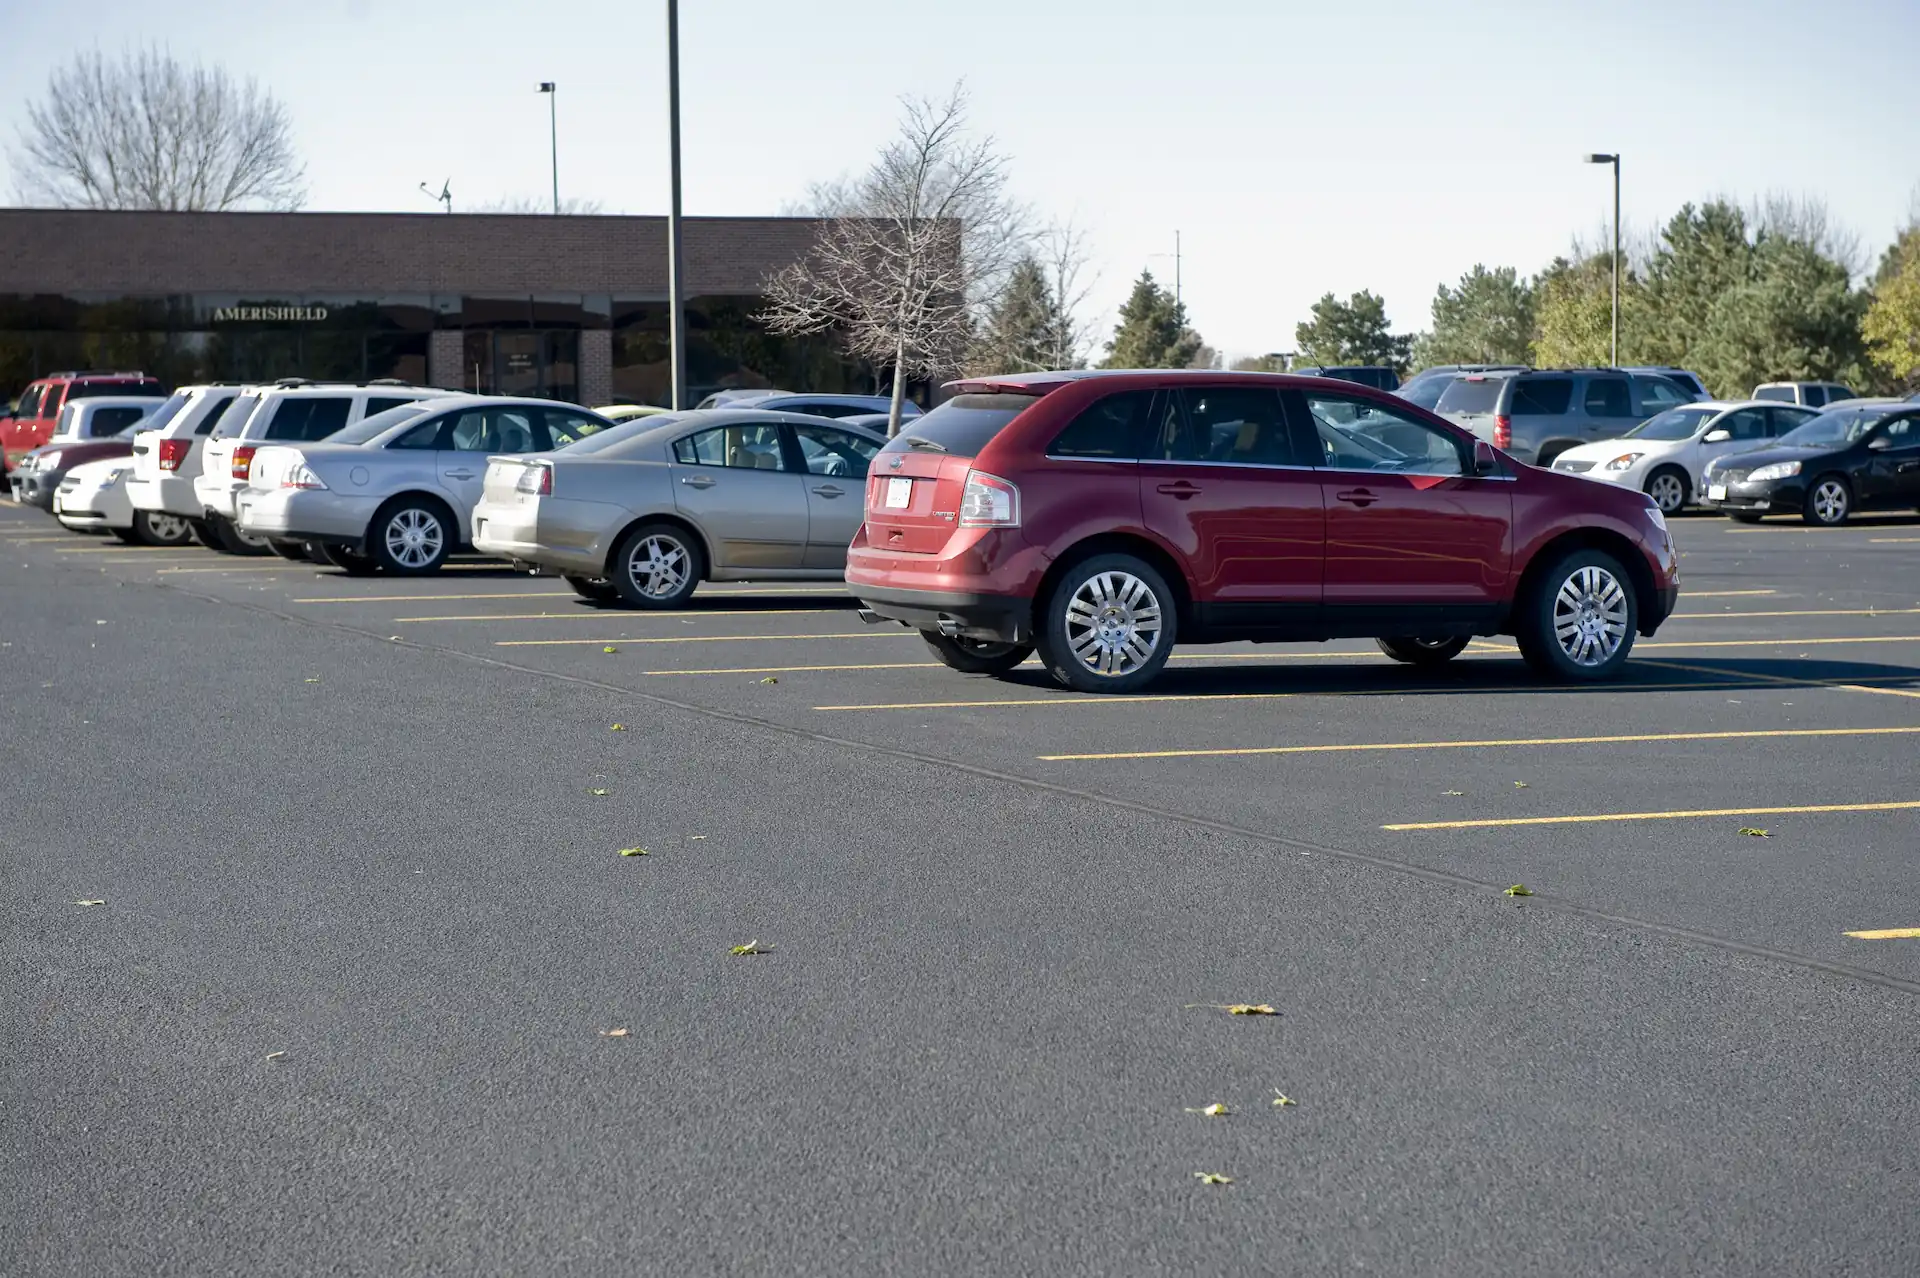 A parking lot newly paved with asphalt outside an Iowa business with several cars parked in it.